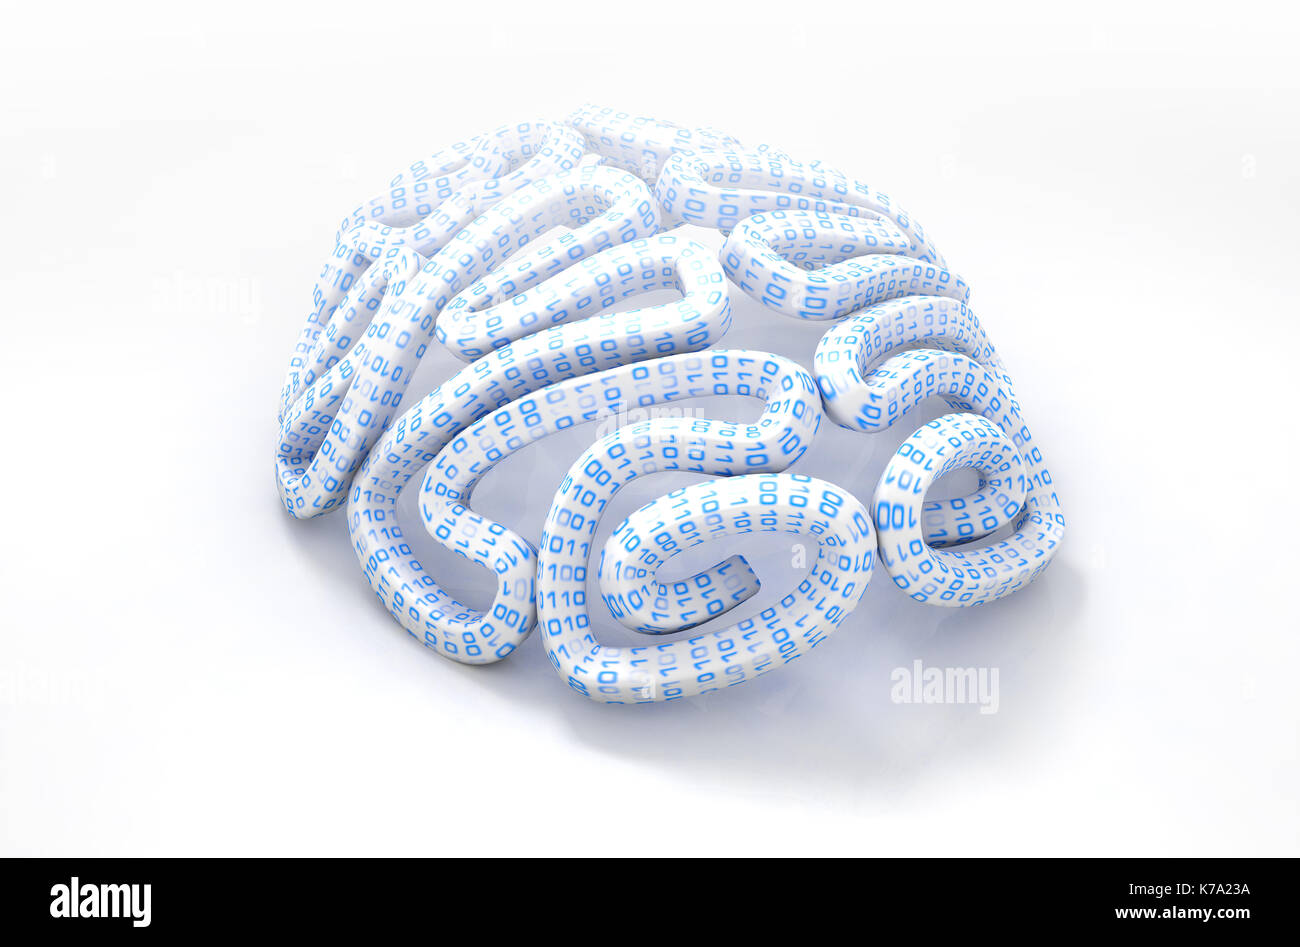 A stylized brain textured with binary computer data code depicting artificial intelligence on an isolated white background - 3D render Stock Photo